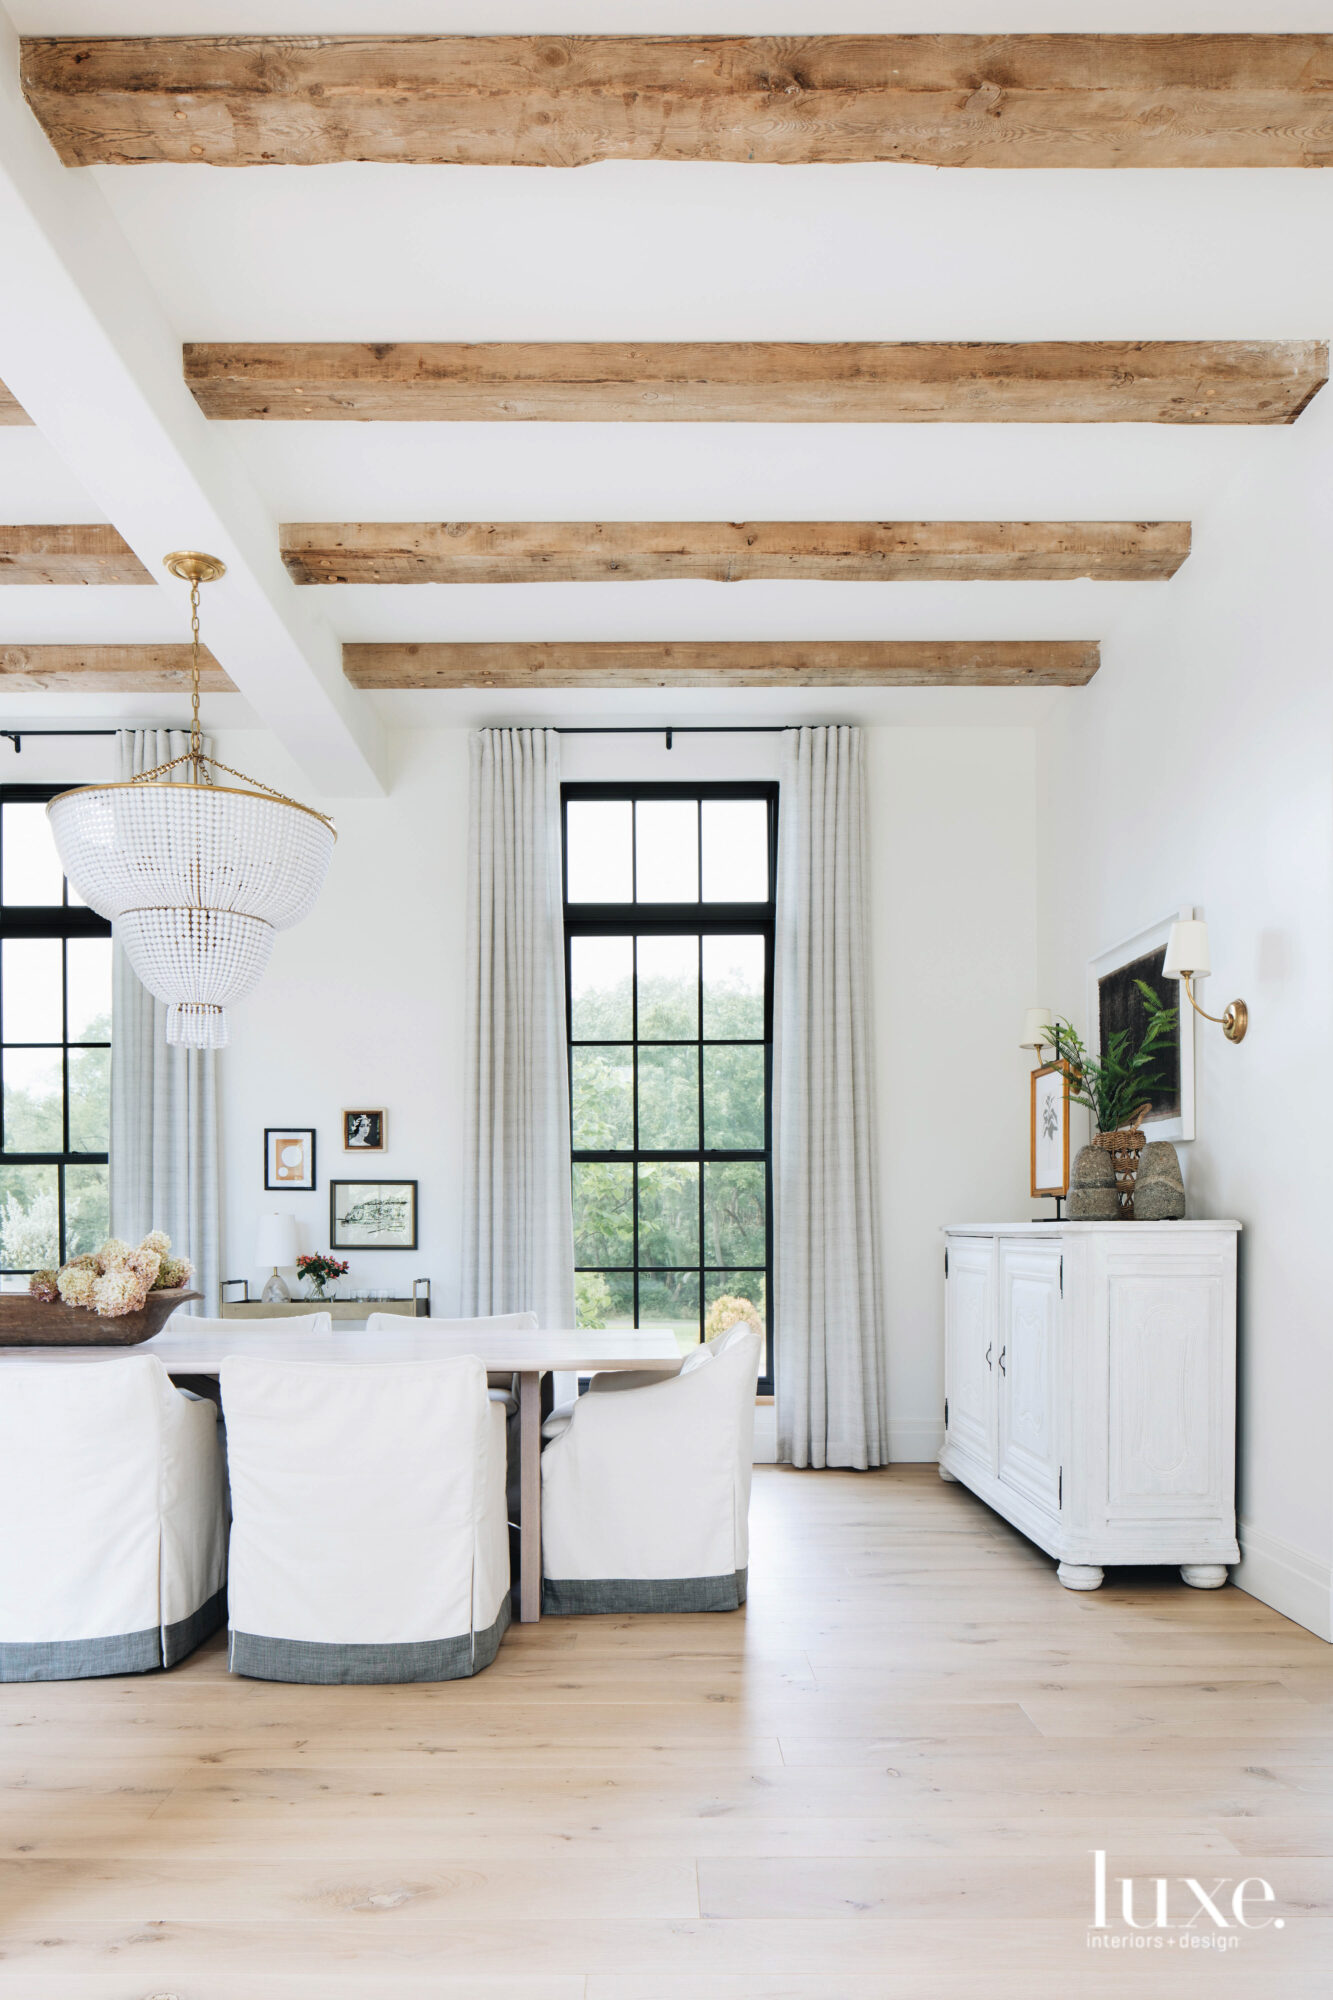 Rough wood beams add a rustic touch to this all-white dining room.